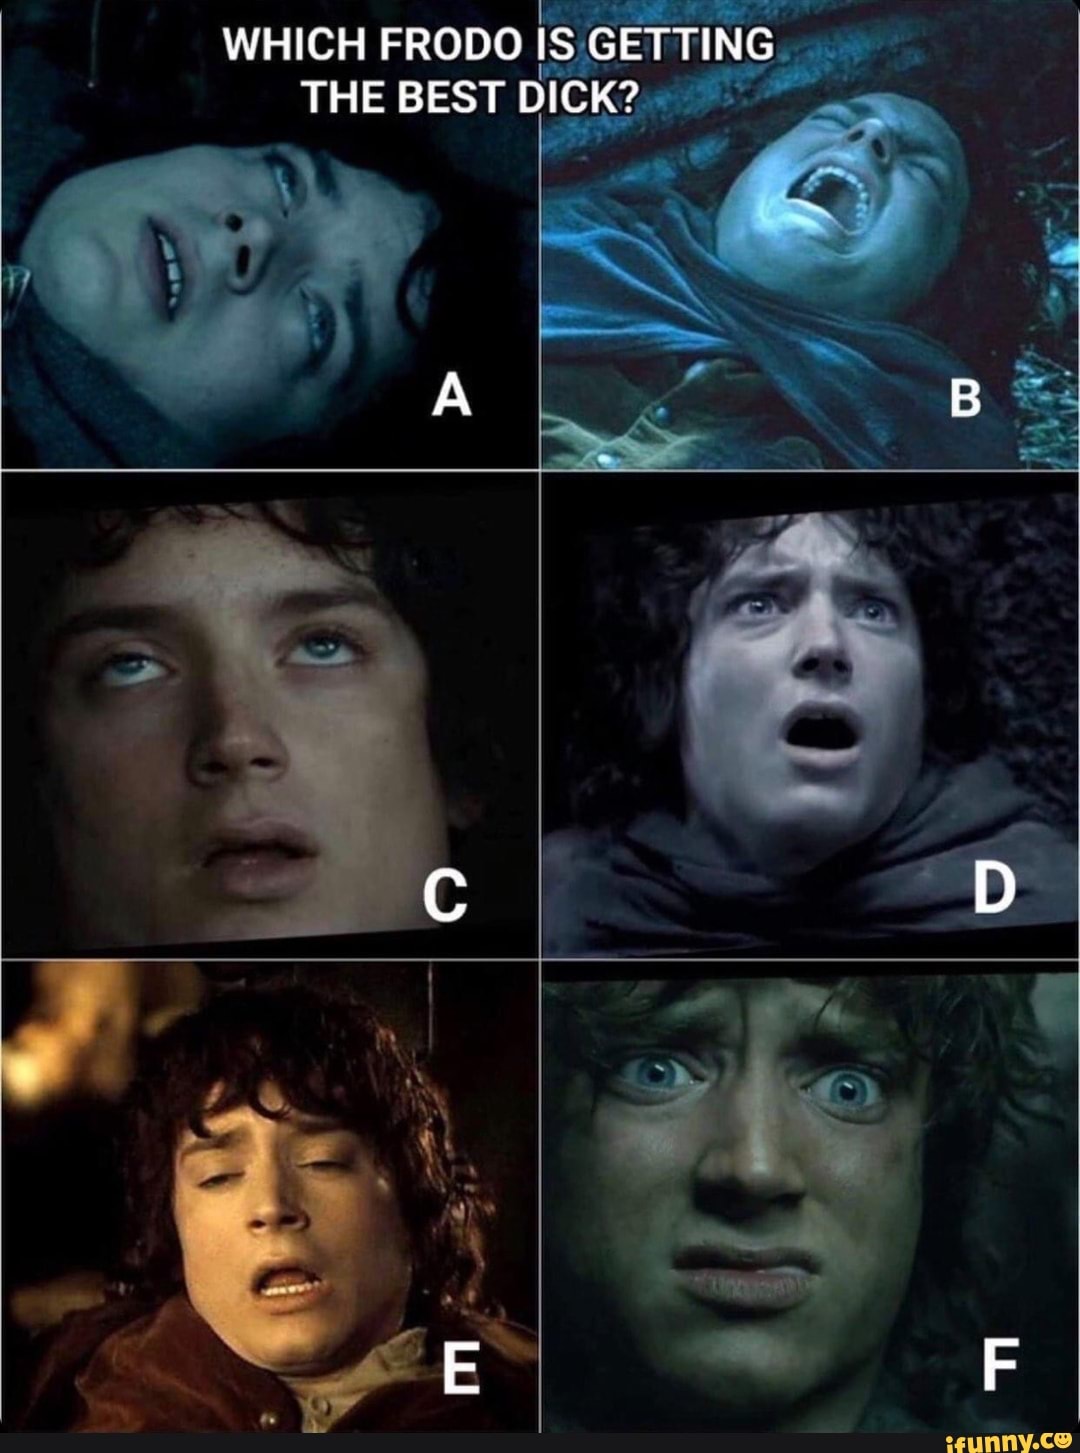 Which frodo is getting the best dick